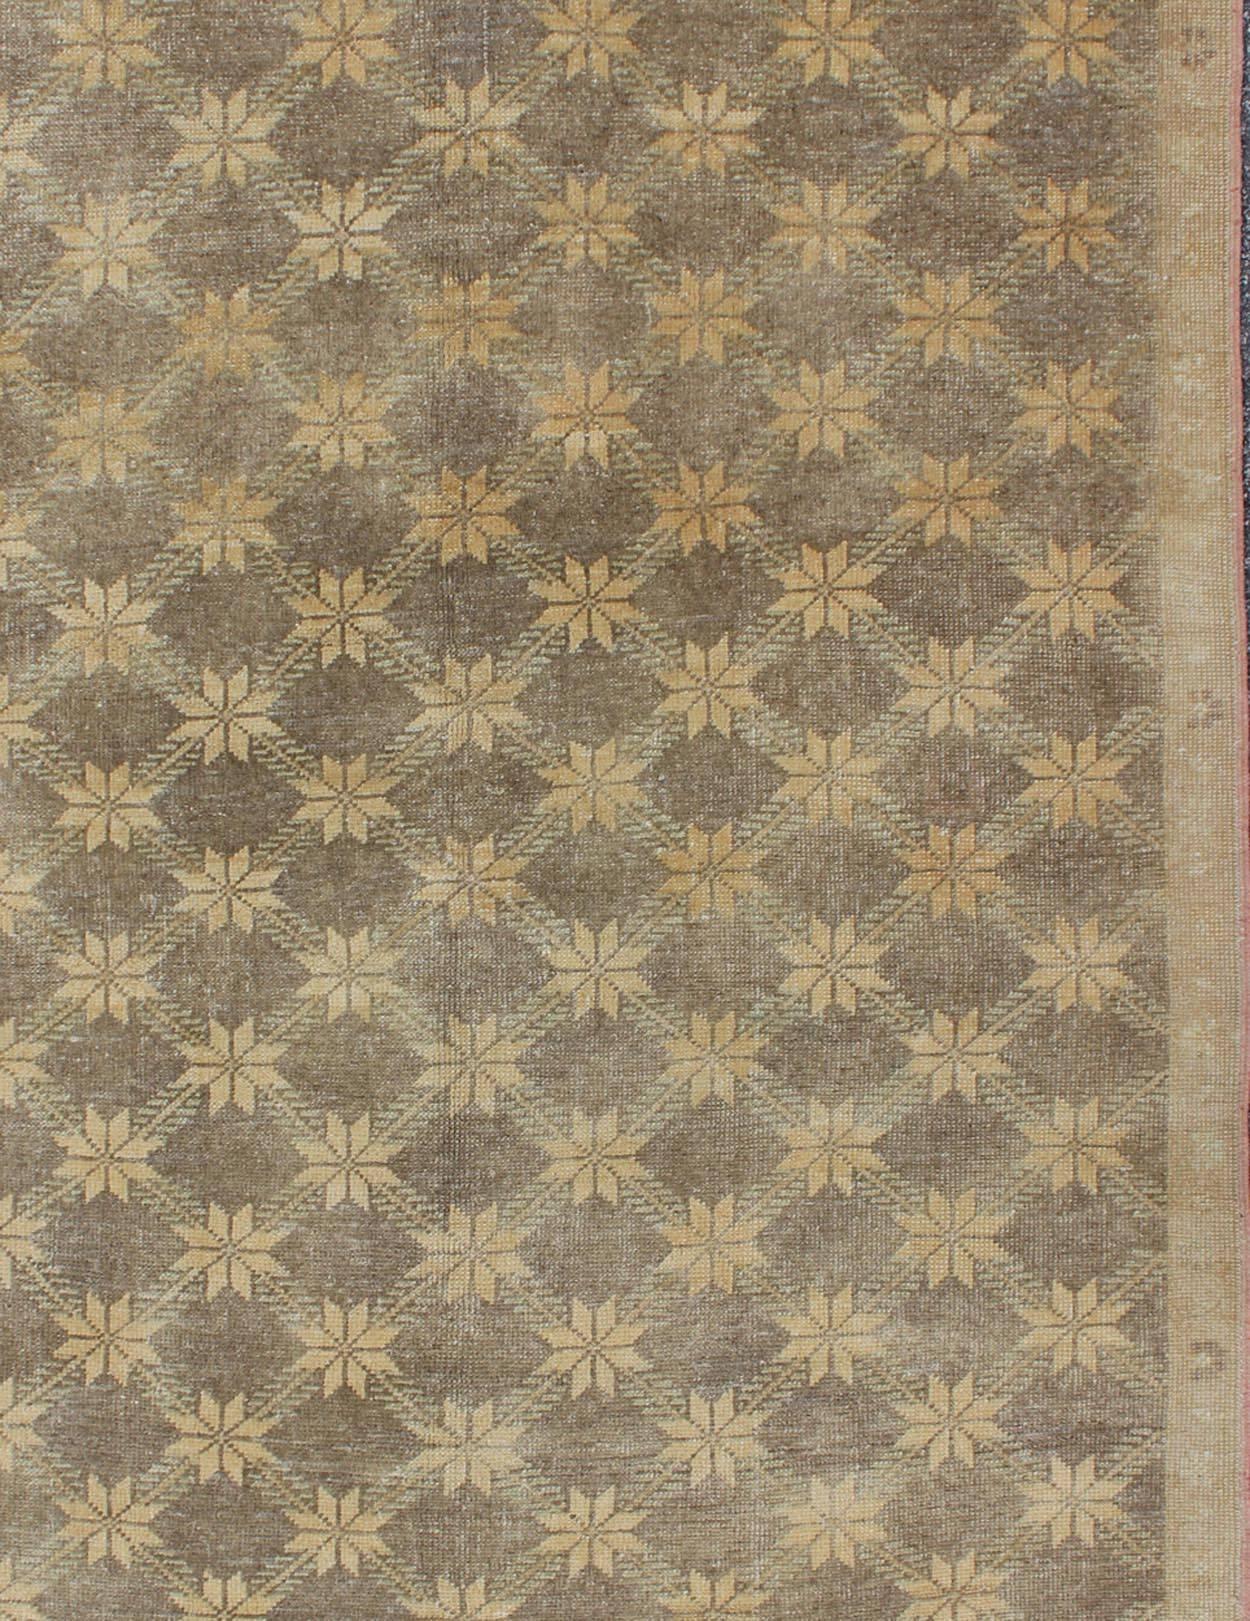 Brown Midcentury Vintage Turkish Oushak Rug with Floral or Star Lattice Pattern In Excellent Condition For Sale In Atlanta, GA